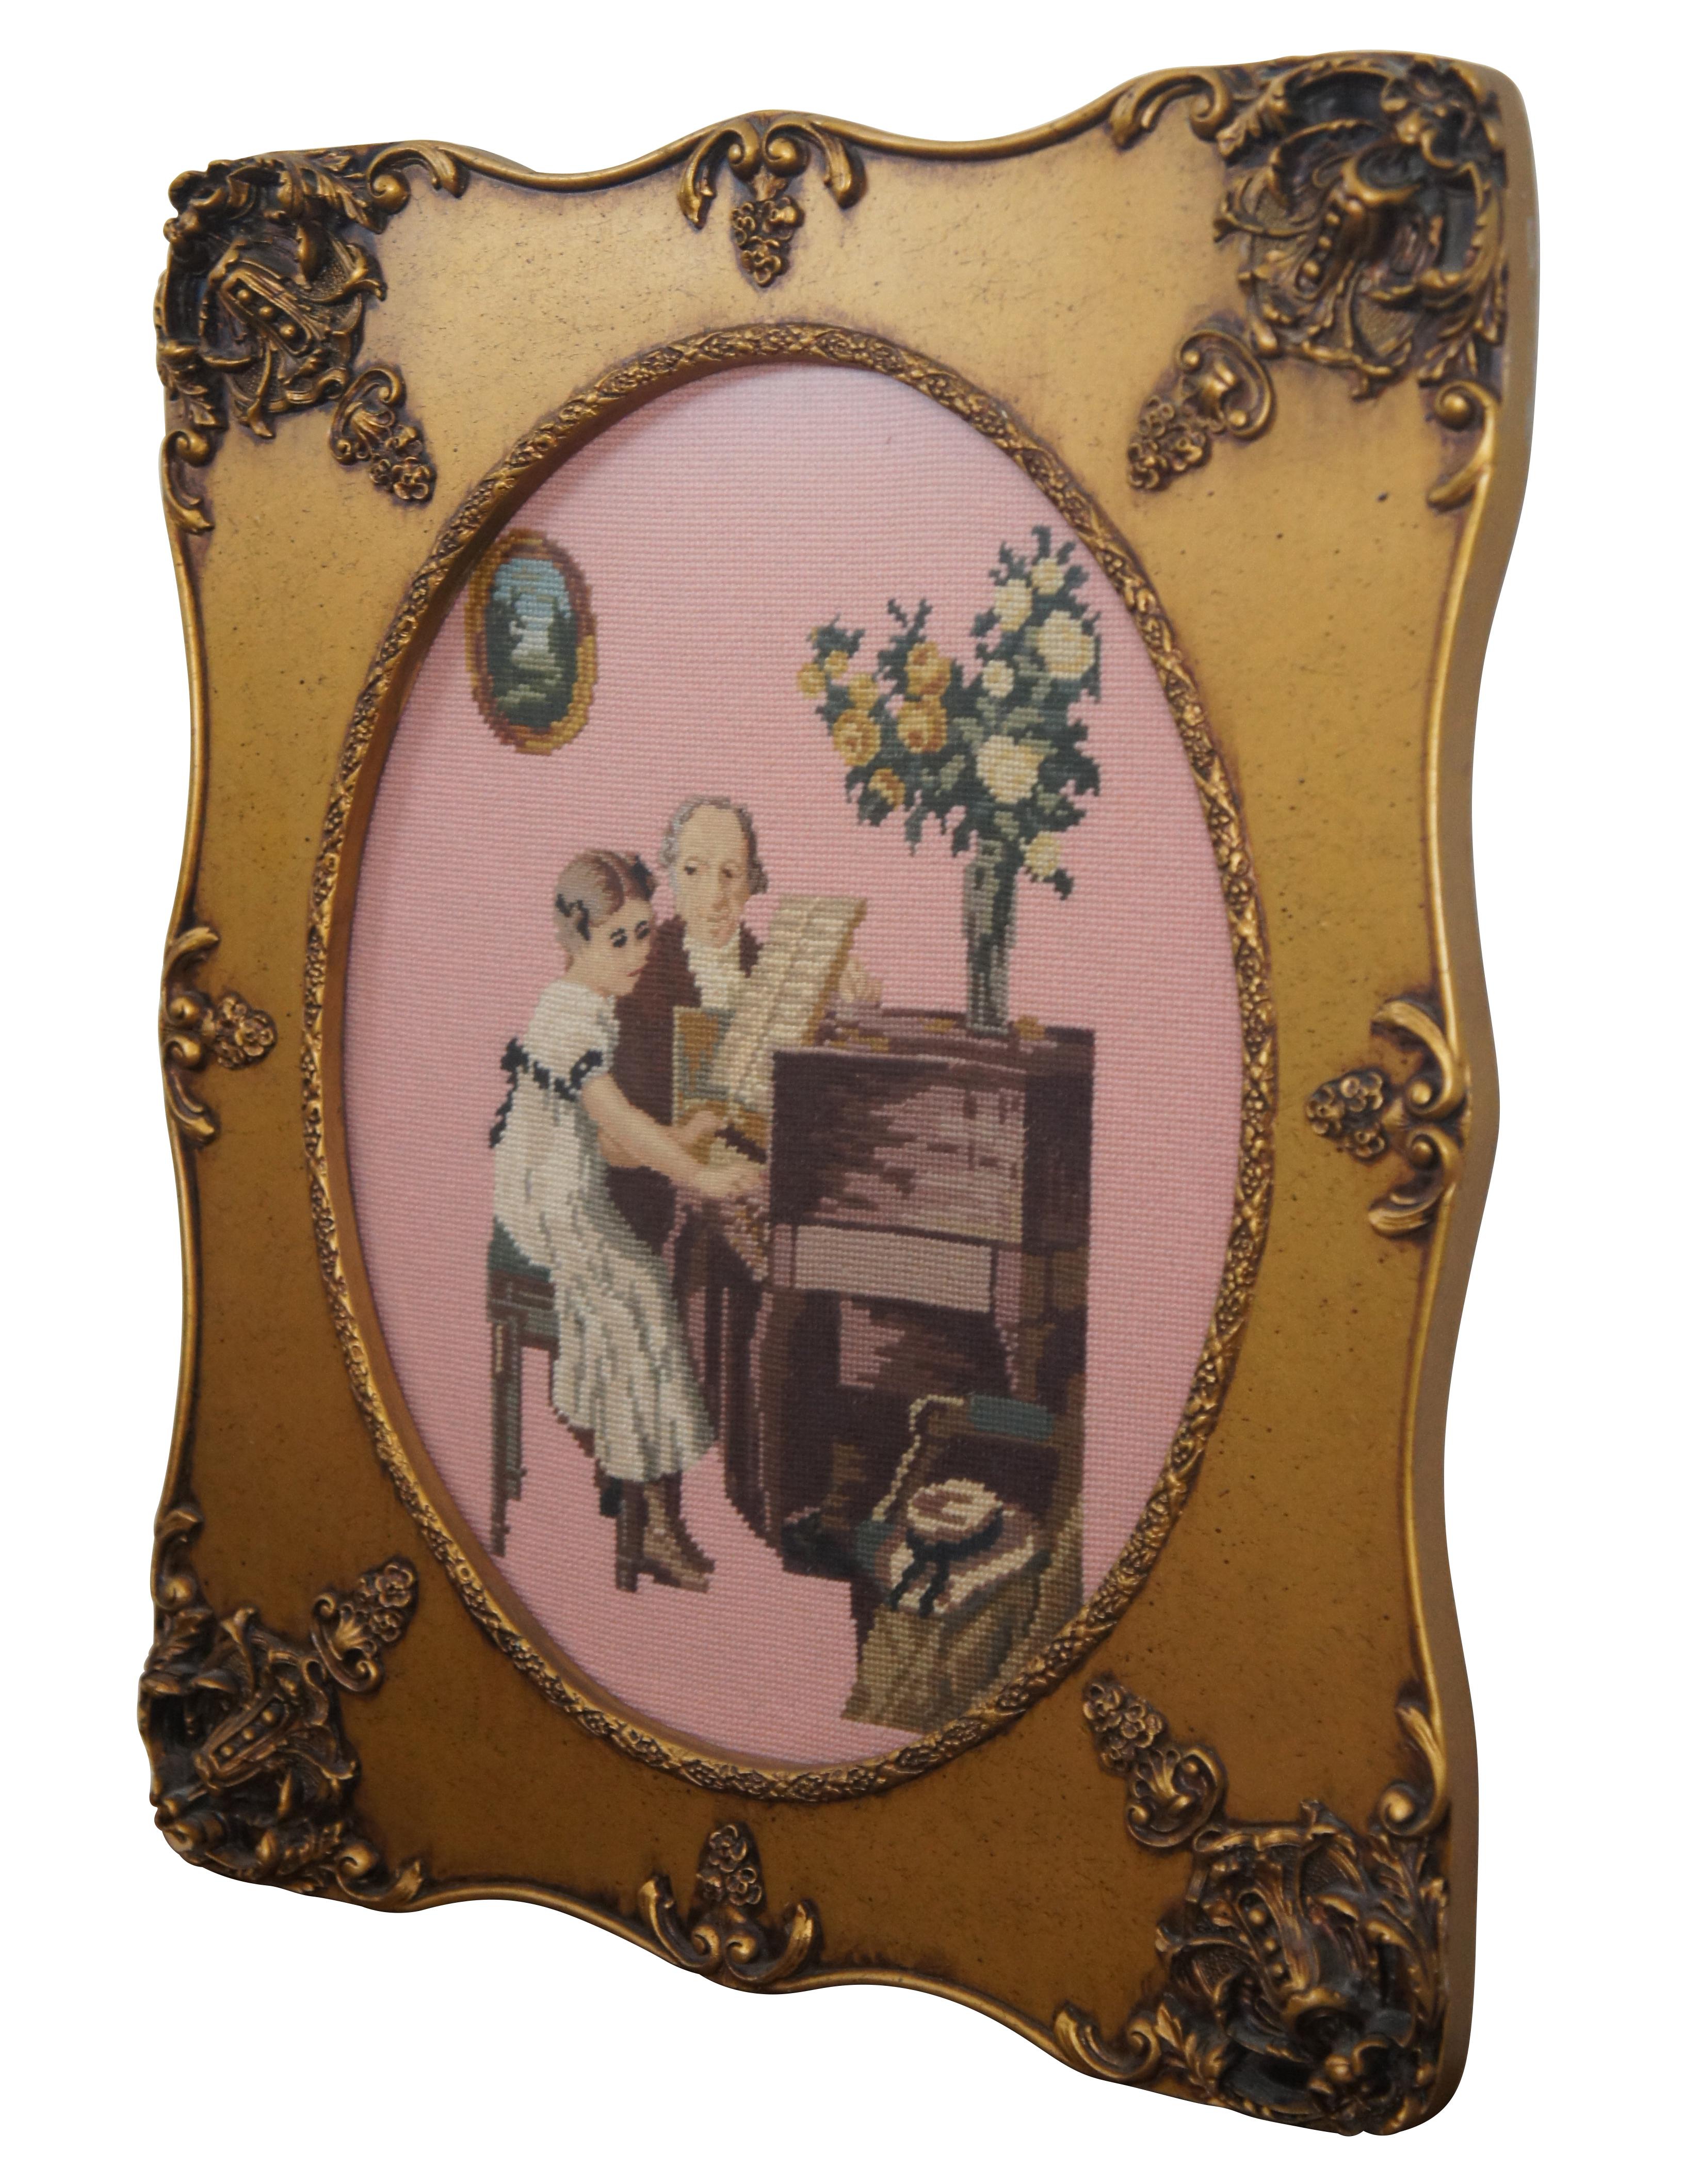 Vintage embroidered scene / tableau showing a young girl and older man in Regency era attire. After work by Jules Alexis Muenier, titled The Piano Lesson. Framed in a scalloped giltwood frame with ornate details.

DIMENSIONS

21.5” x 1” x 25.5”